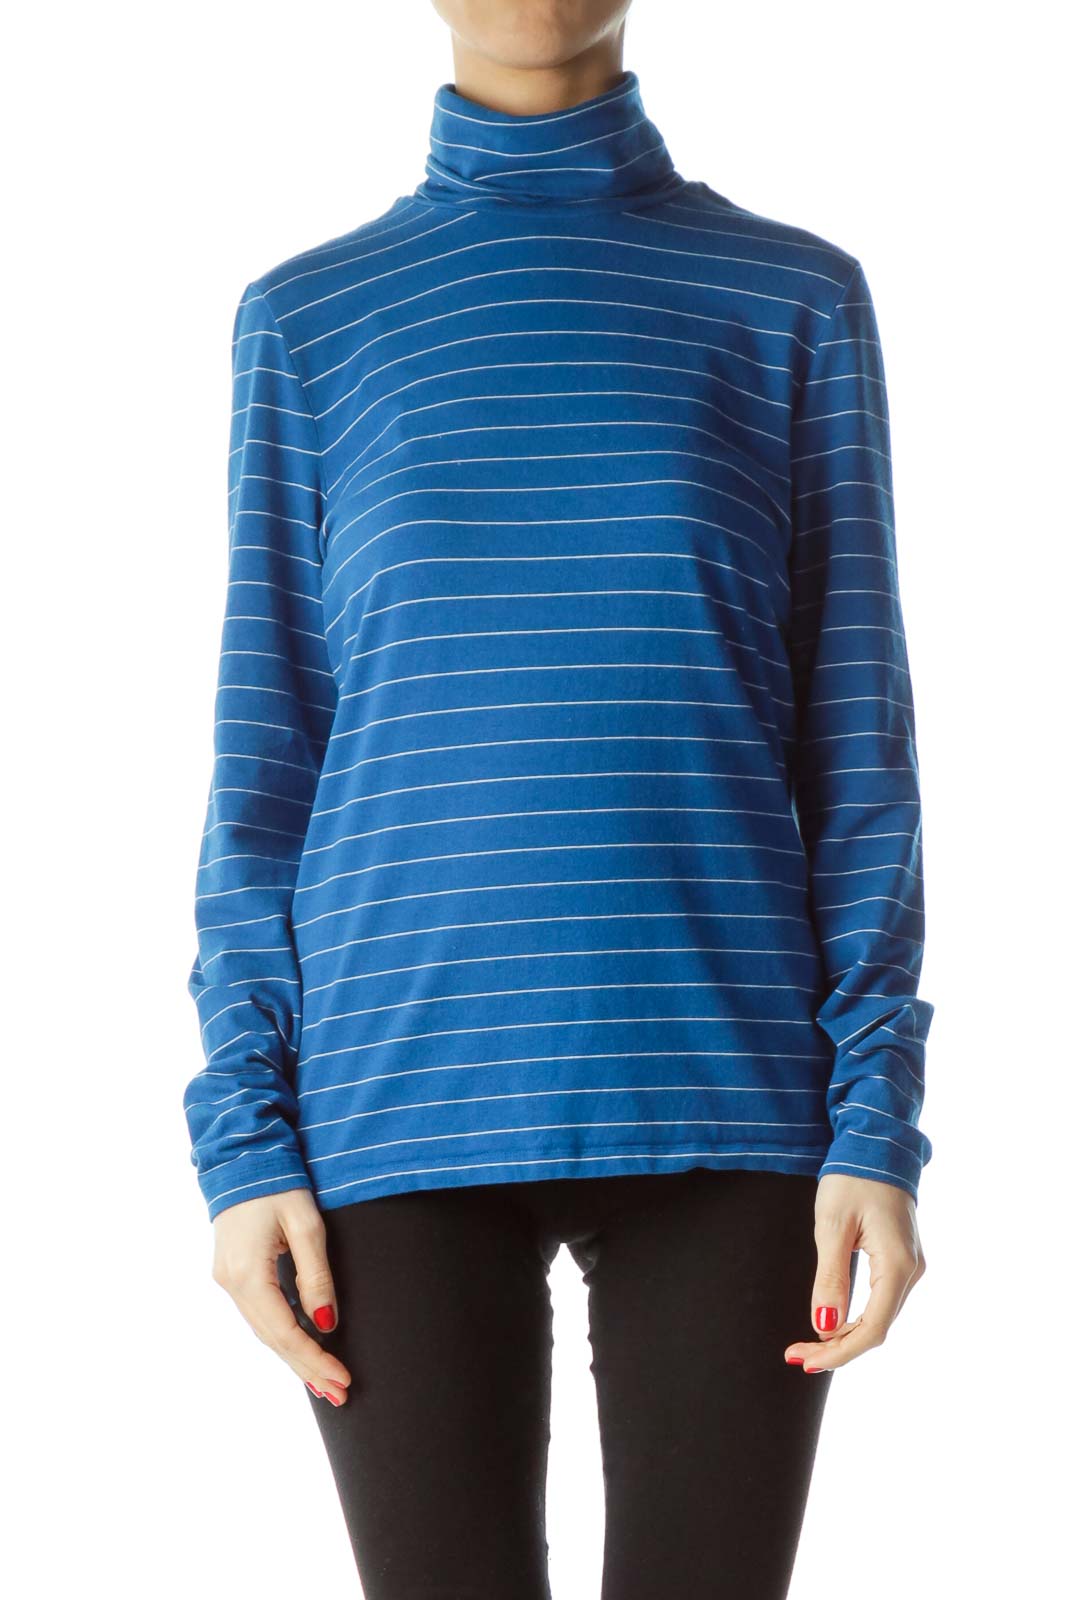 Blue White Striped Long-Sleeve Jersey-Knit Top Front